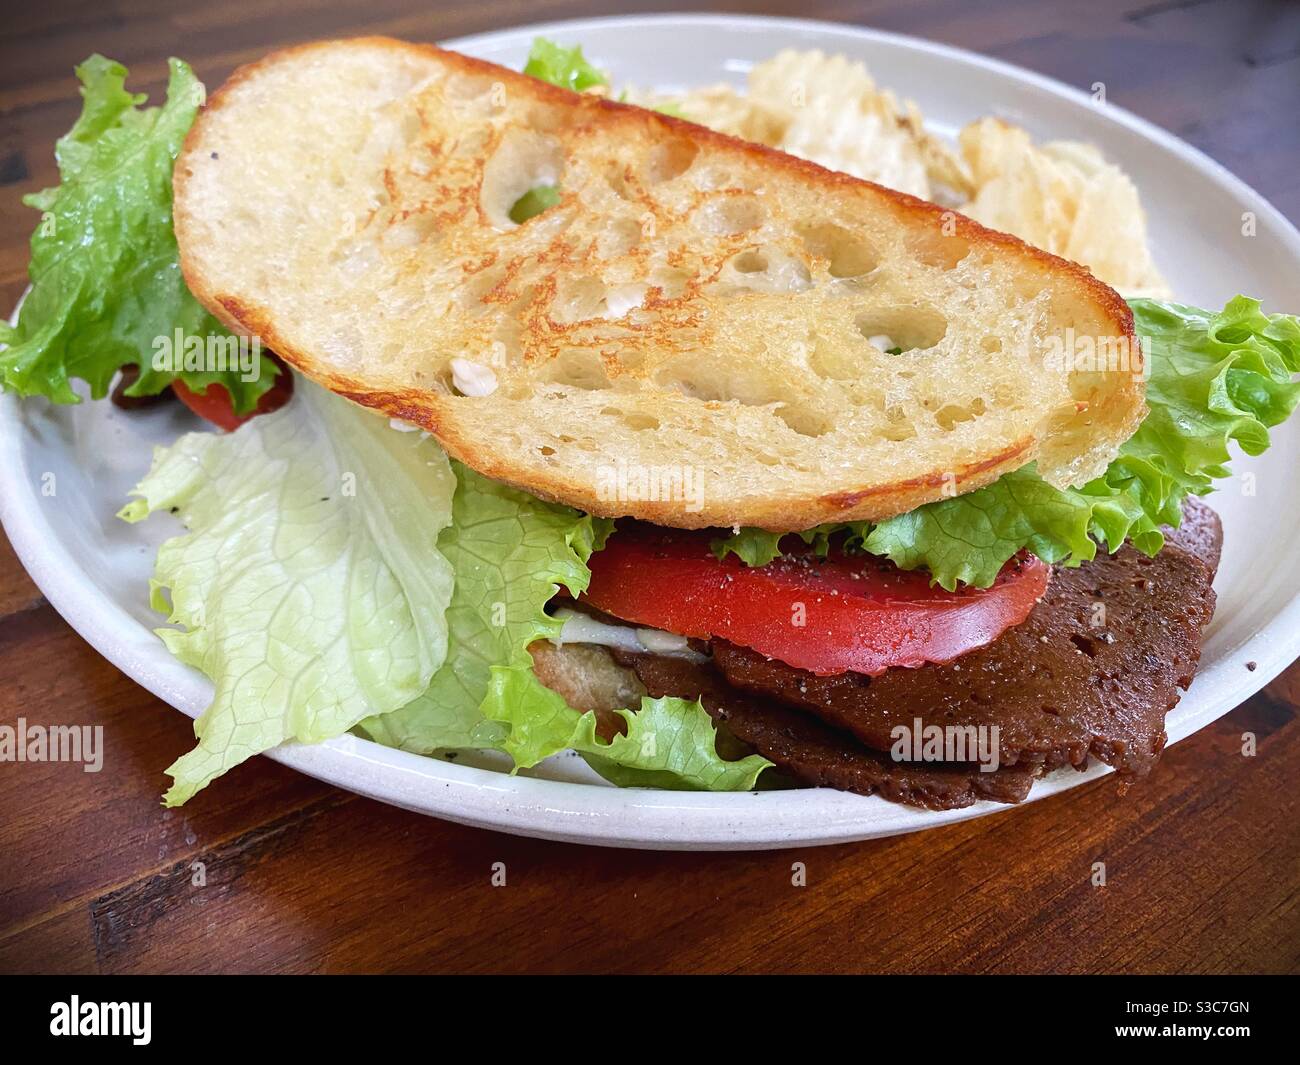 Vegan blt and chips. Stock Photo